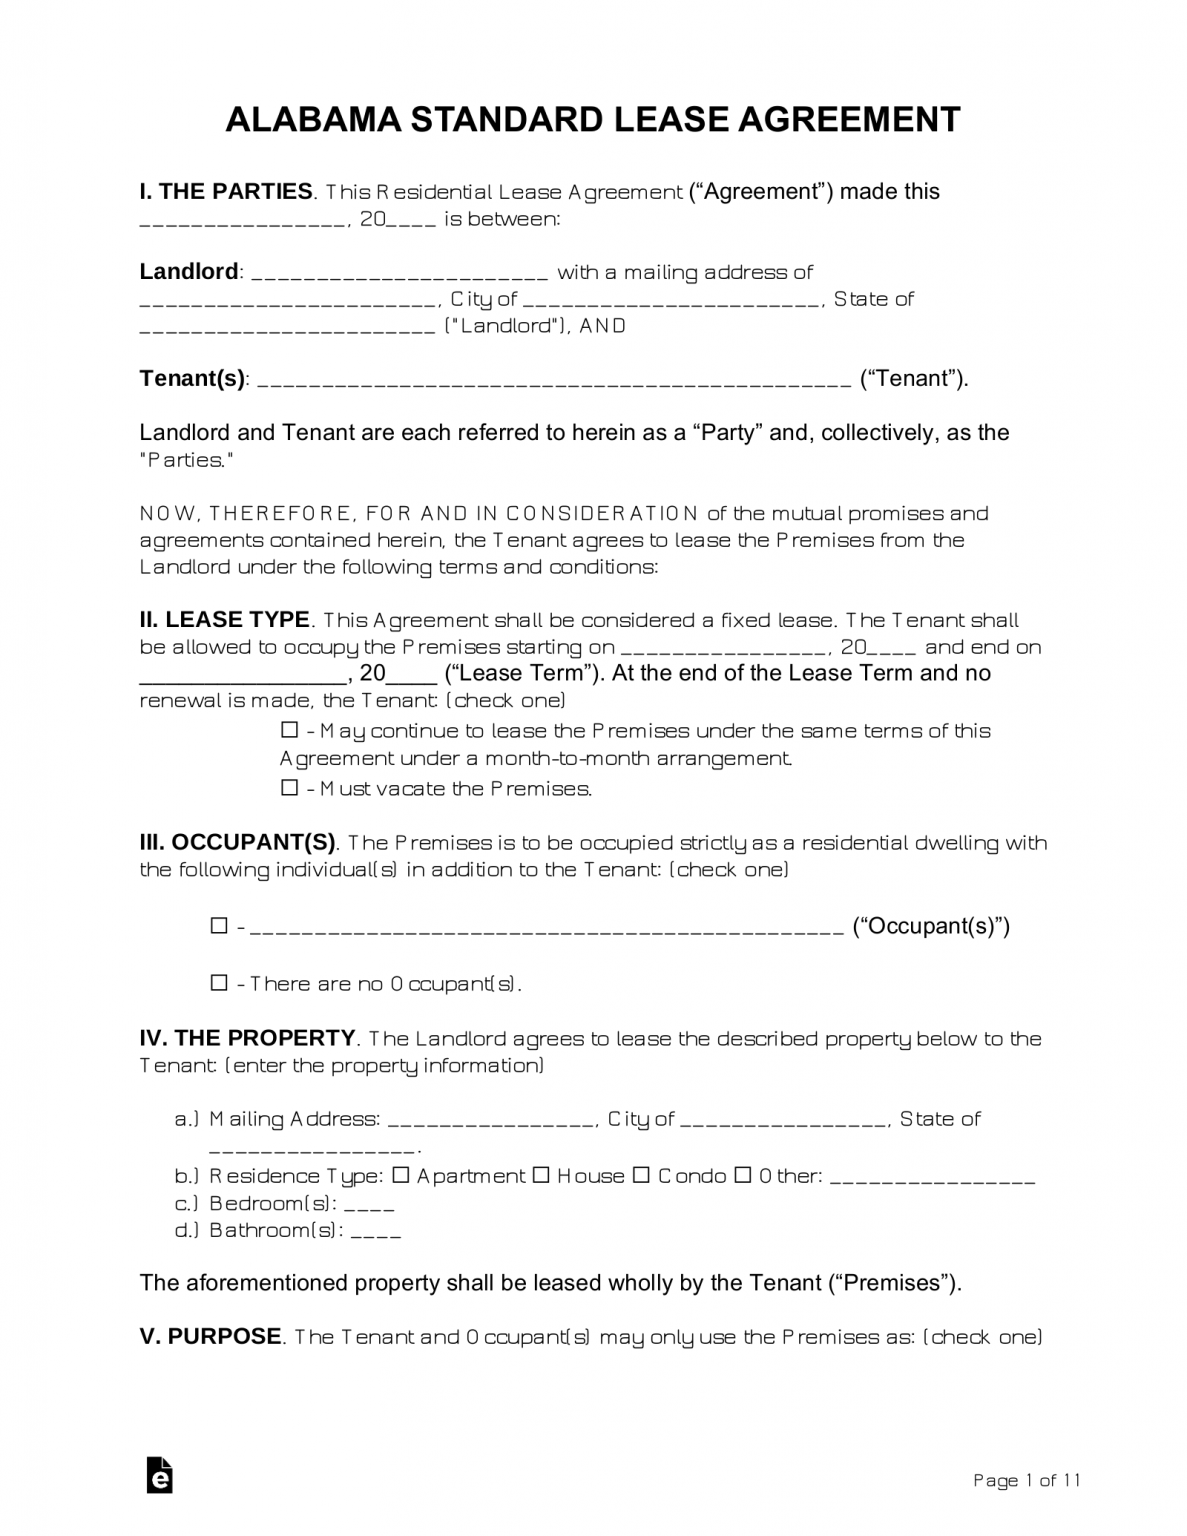 free-alabama-standard-residential-lease-agreement-template-pdf-word-eforms